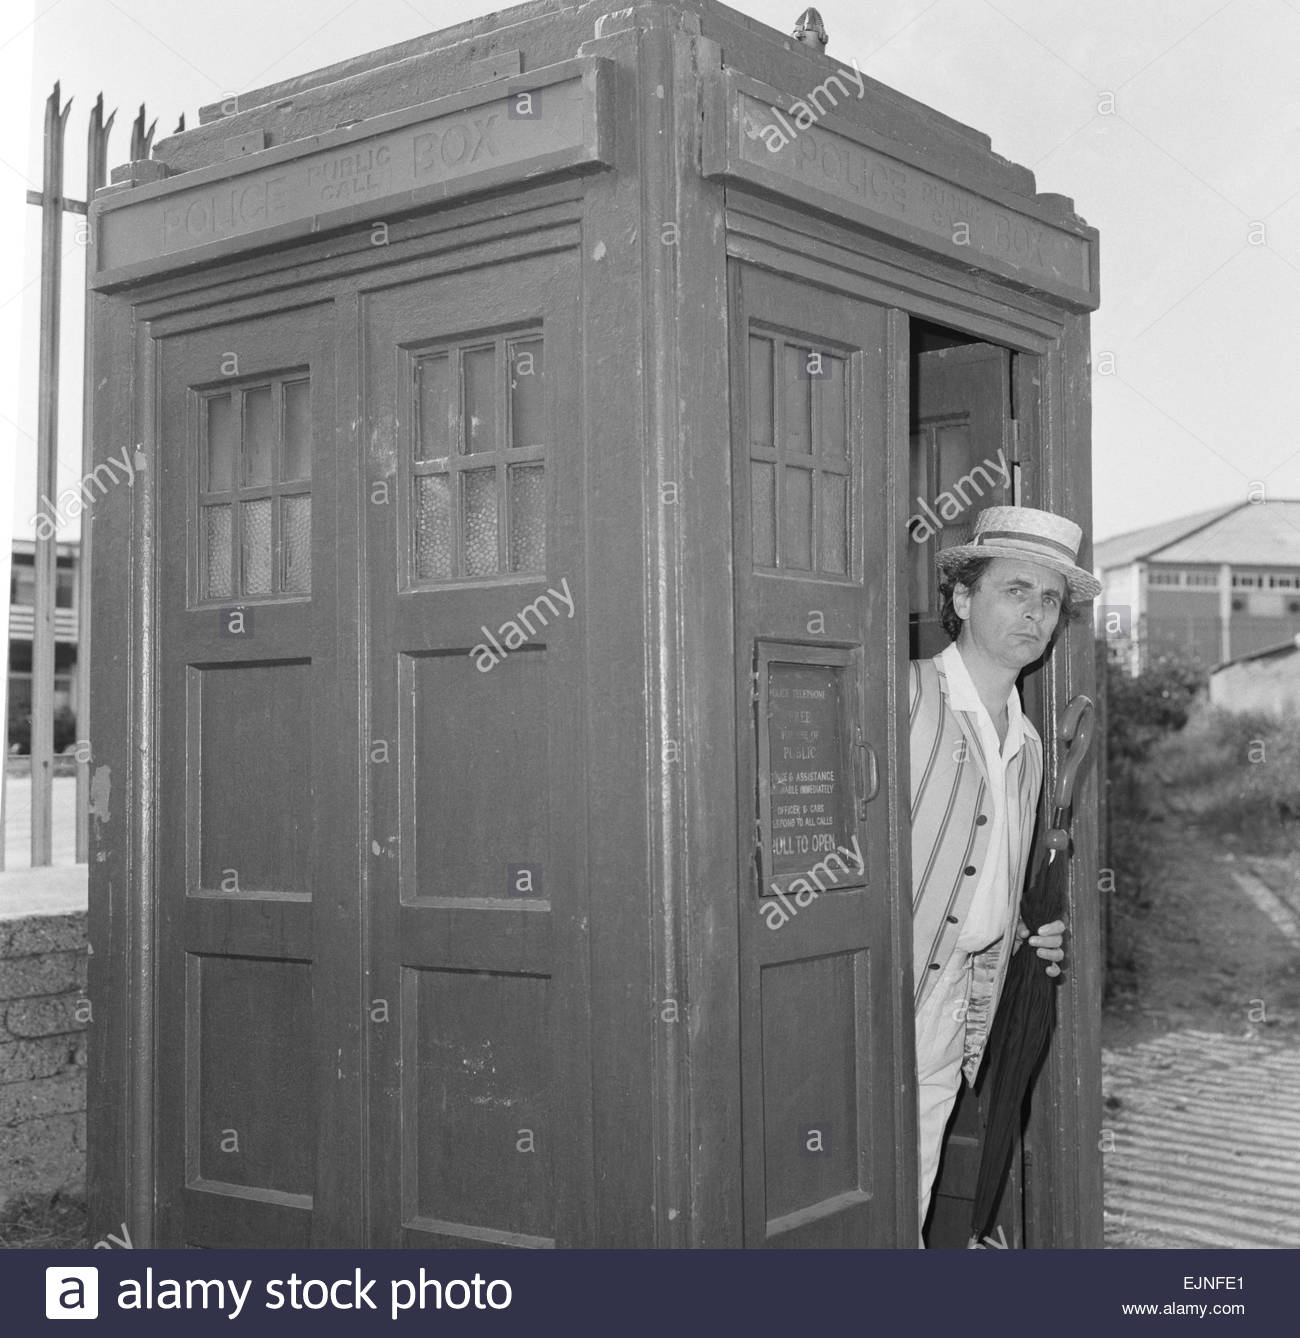 sylvester-mccoy-as-doctor-who-seen-here-filming-at-the-majestic-holiday-EJNFE1.jpg